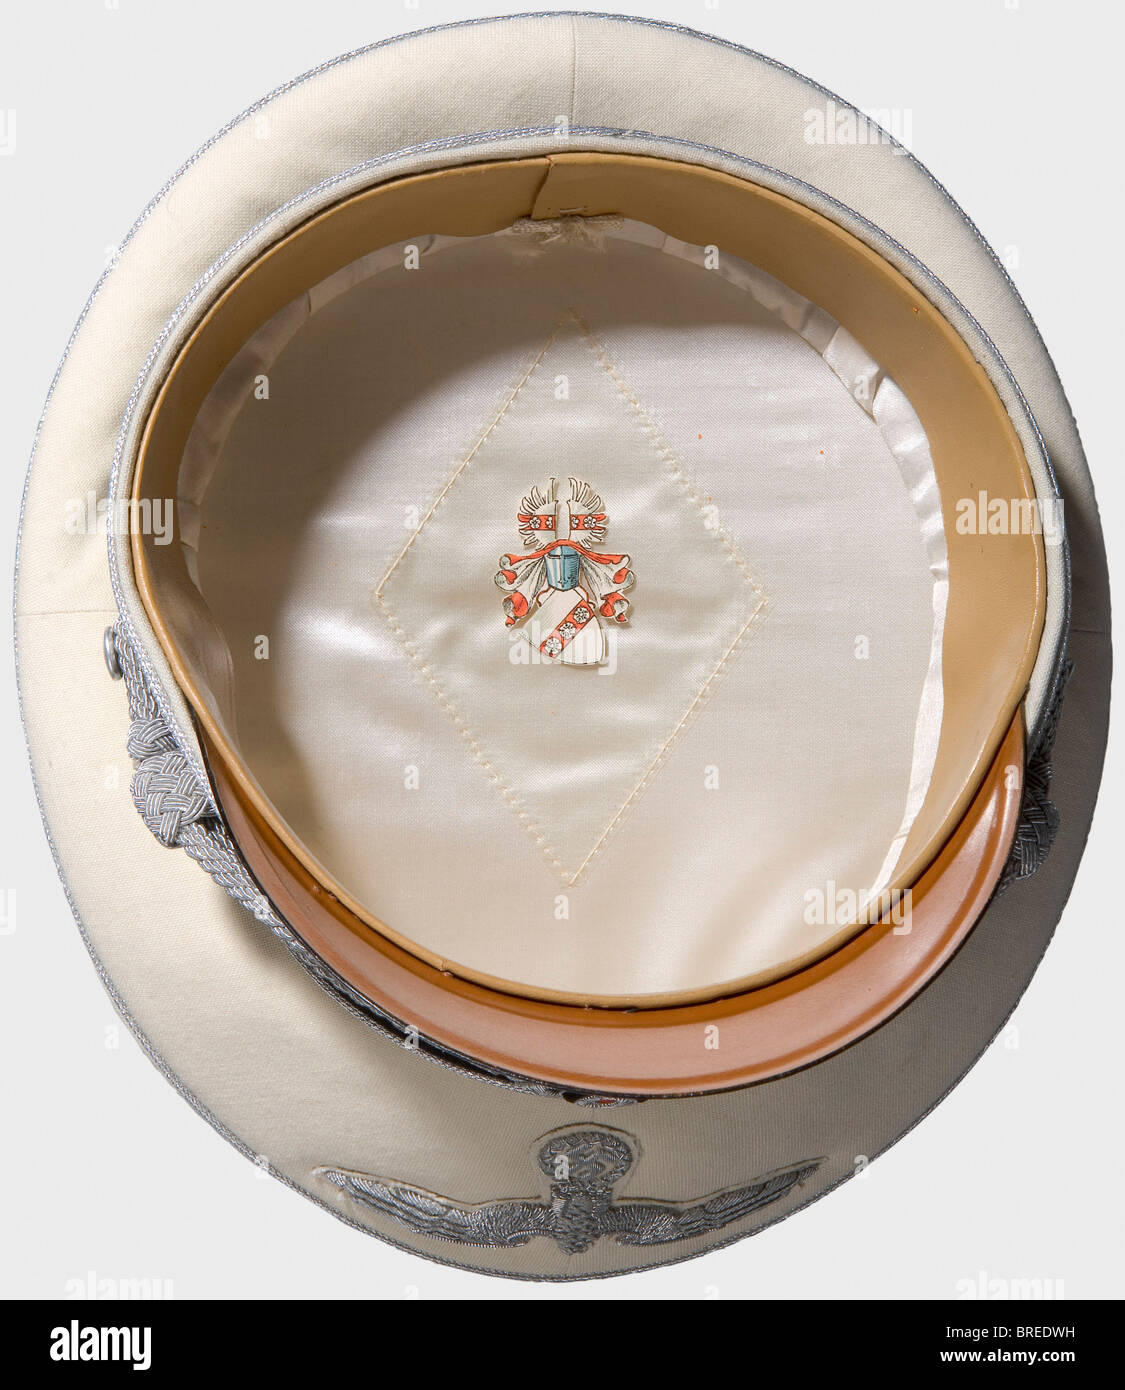 Franz von Papen (1879 - 1969), a summer service cap for the diplomat's uniform Fine, white linen with black cap band and silver piping, silver-embroidered party eagle on white backing, silver-embroidered cap wreath on black backing, and a silver cap cord. Cream-coloured silk lining with the von Papen family coat of arms on the inside label. Insignia are slightly oxidized. In 1932, Franz von Papen was appointed Reich's Chancellor by the Reich's President Paul von Hindenburg, during 1933 - 1934, he was vice-chancellor in Hitler's cabinet, as ambassador, he played, Stock Photo